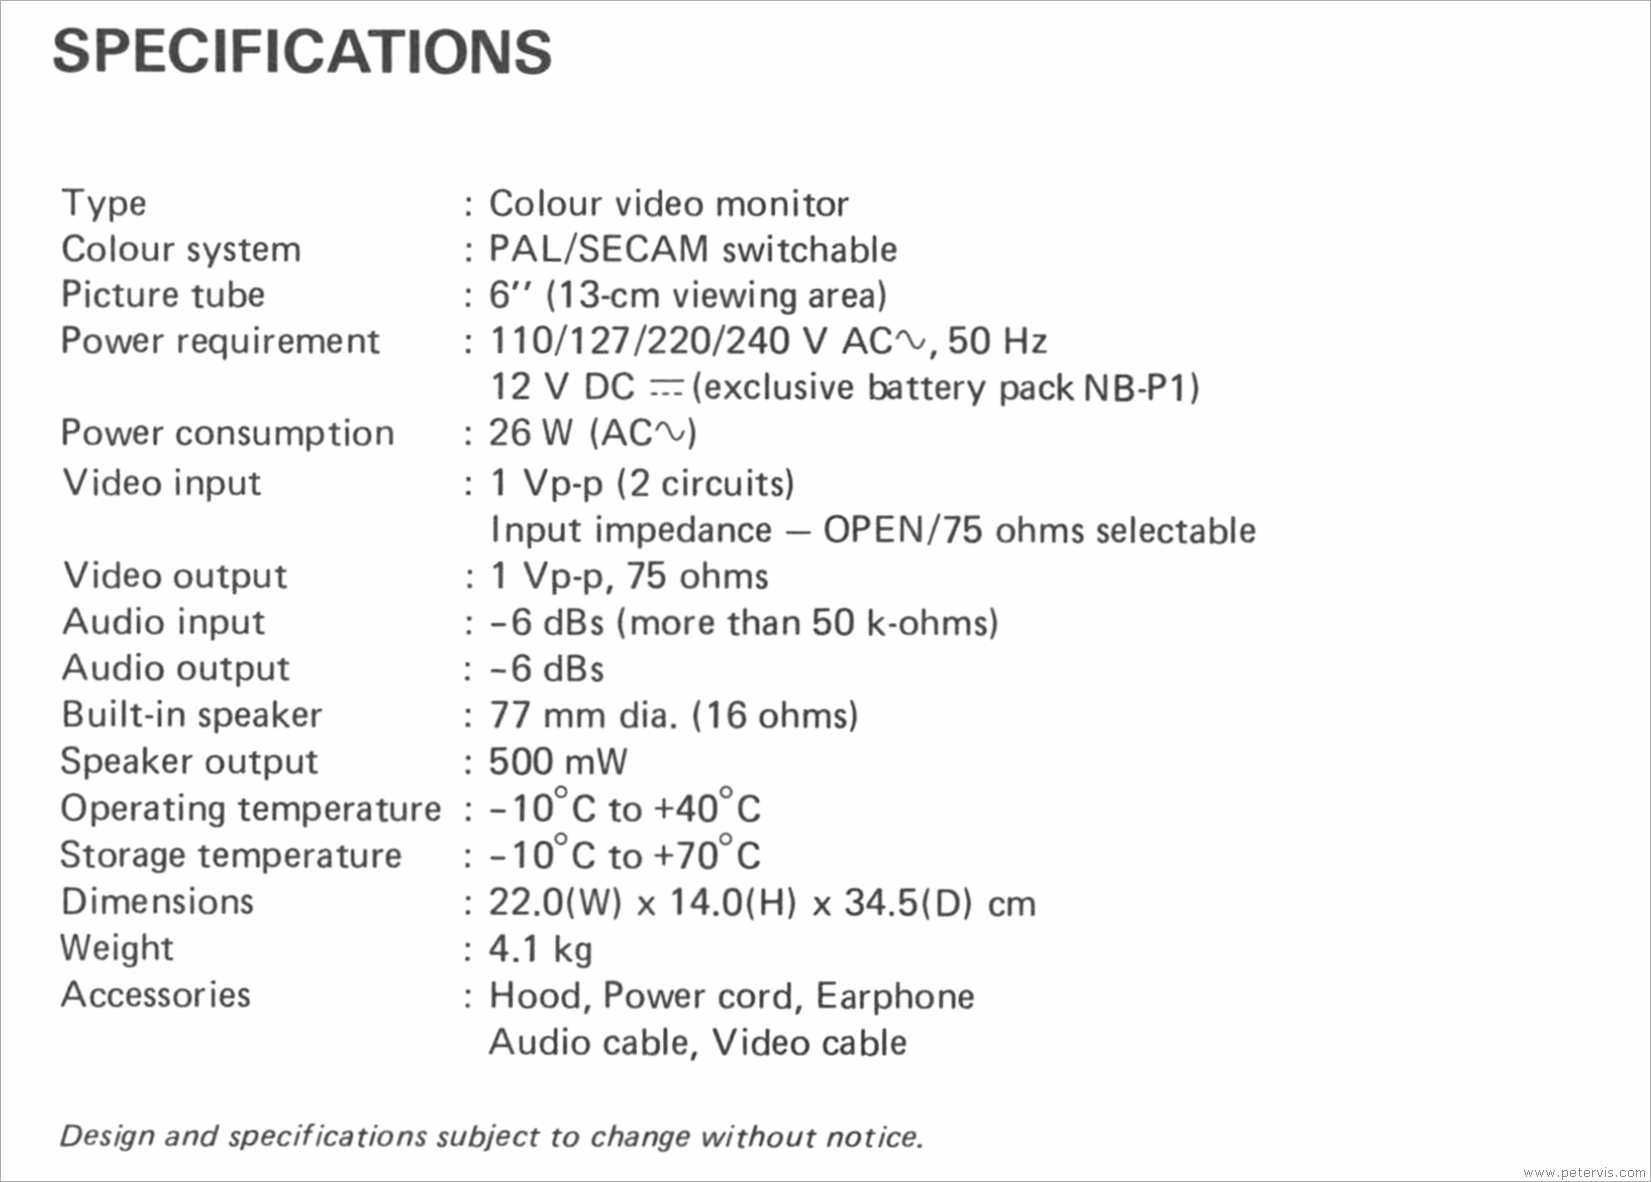 Specification